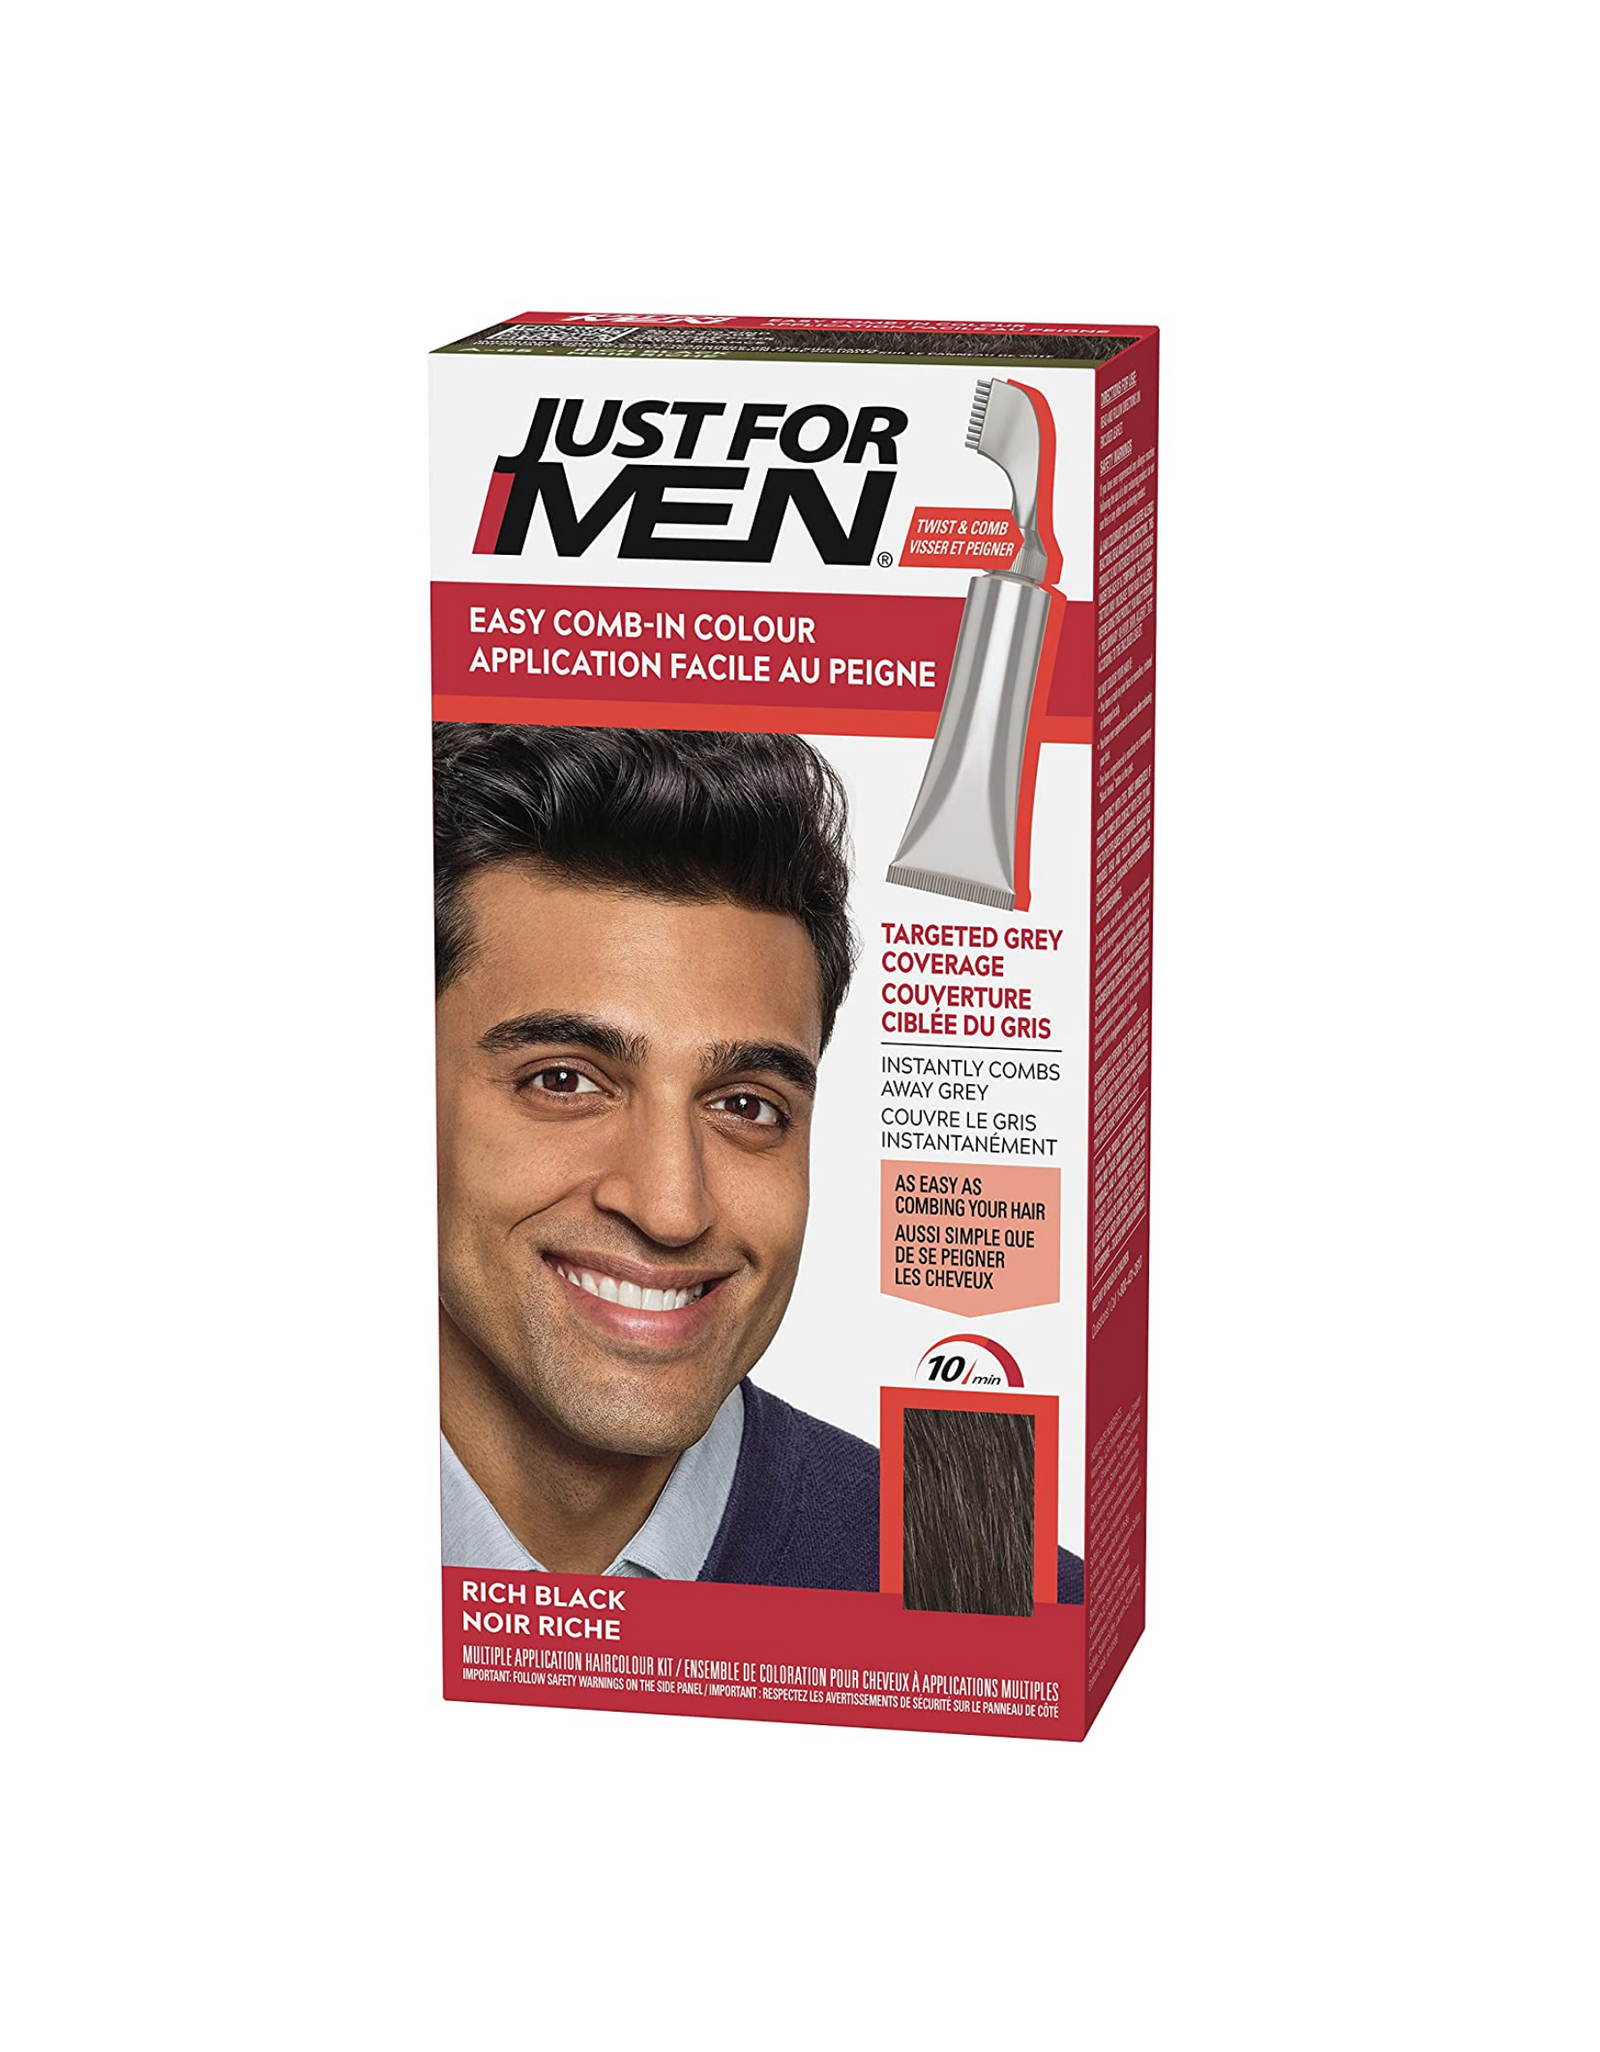 Just For Men Easy Comb-In Color Mens Hair Dye, Easy, Rich Black (Pack of 1)